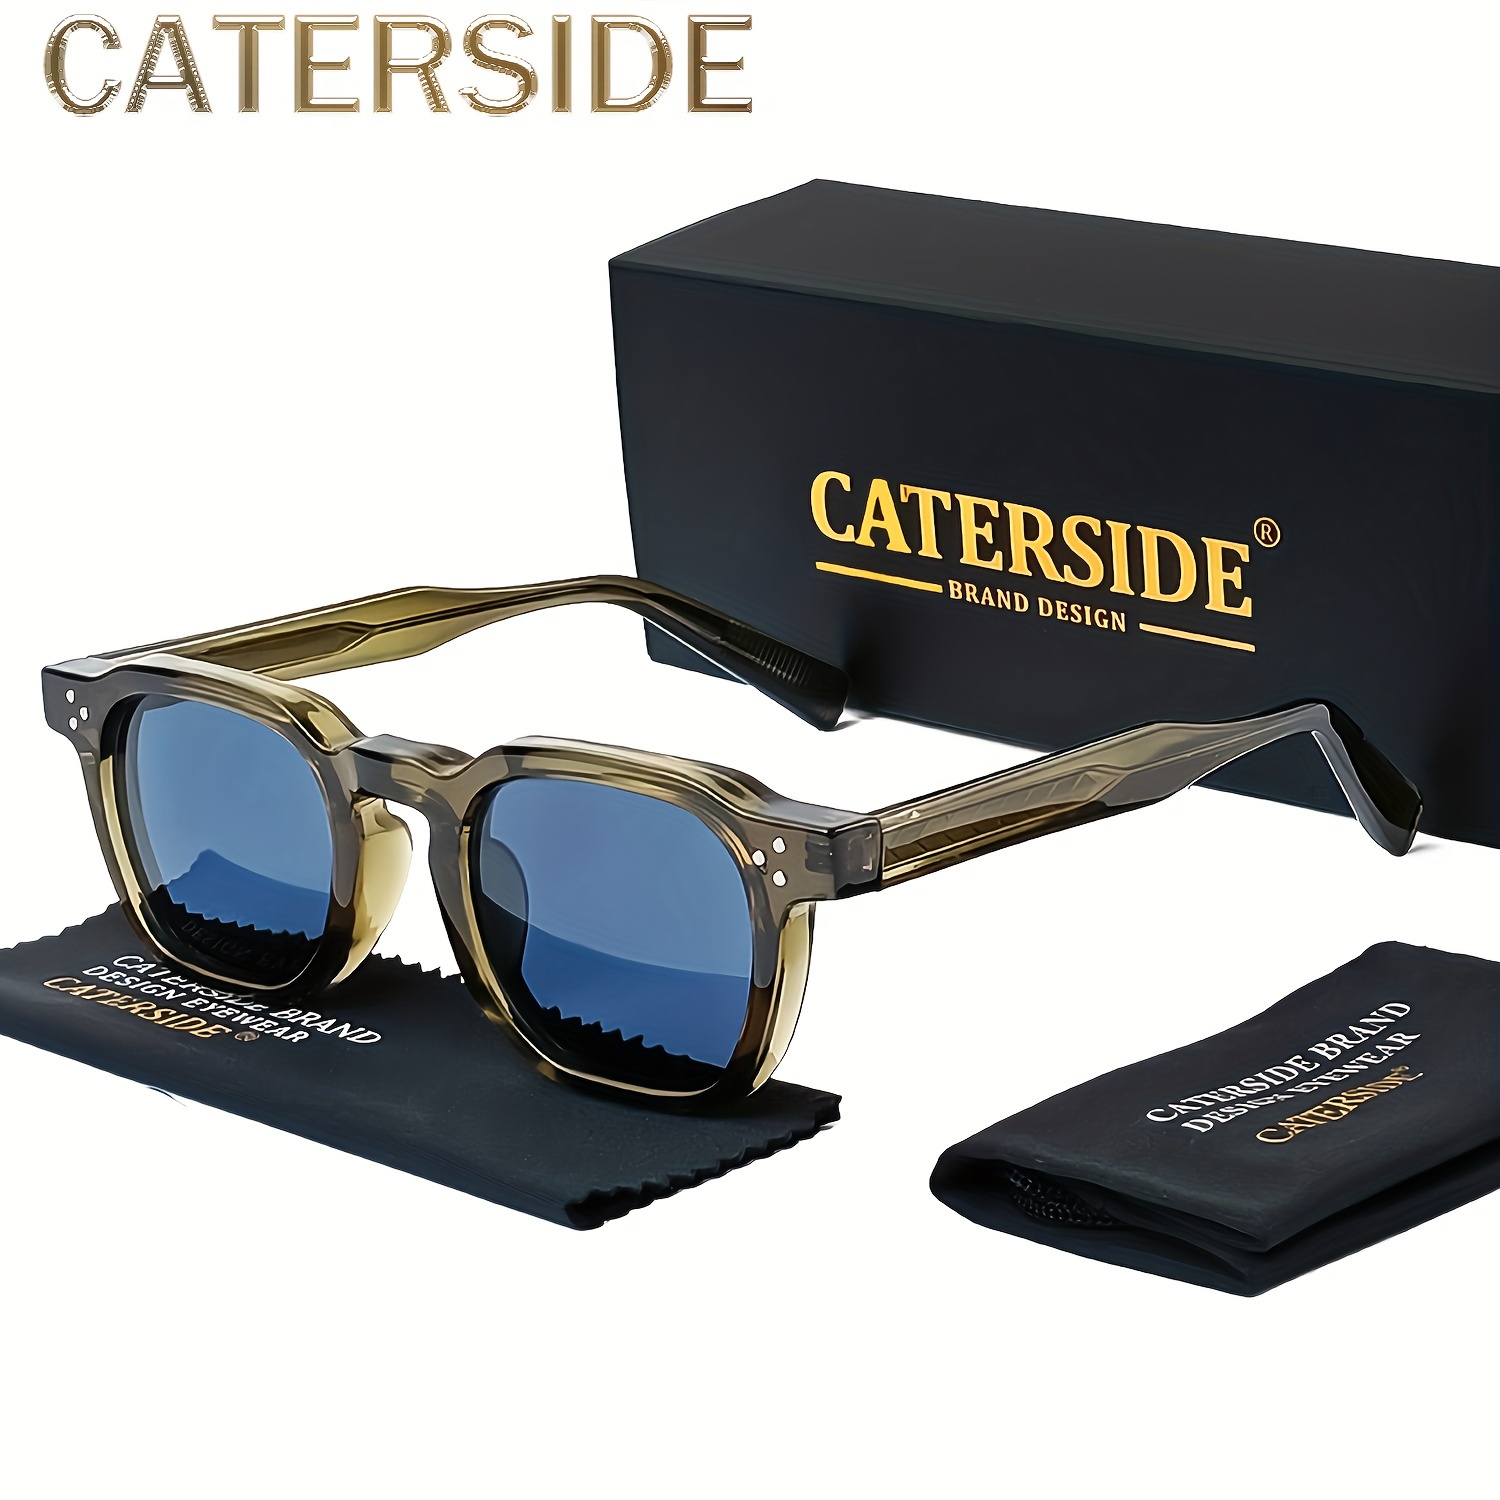 

Caterside Men's & Women's Glasses - Full Rim Metal & Acetate Frame, Pc Lens For Climbing, Hiking & Daily Leisure - Vacation Style Accessory, Outdoor Sports & Casual Eyewear With Case Set Rc005